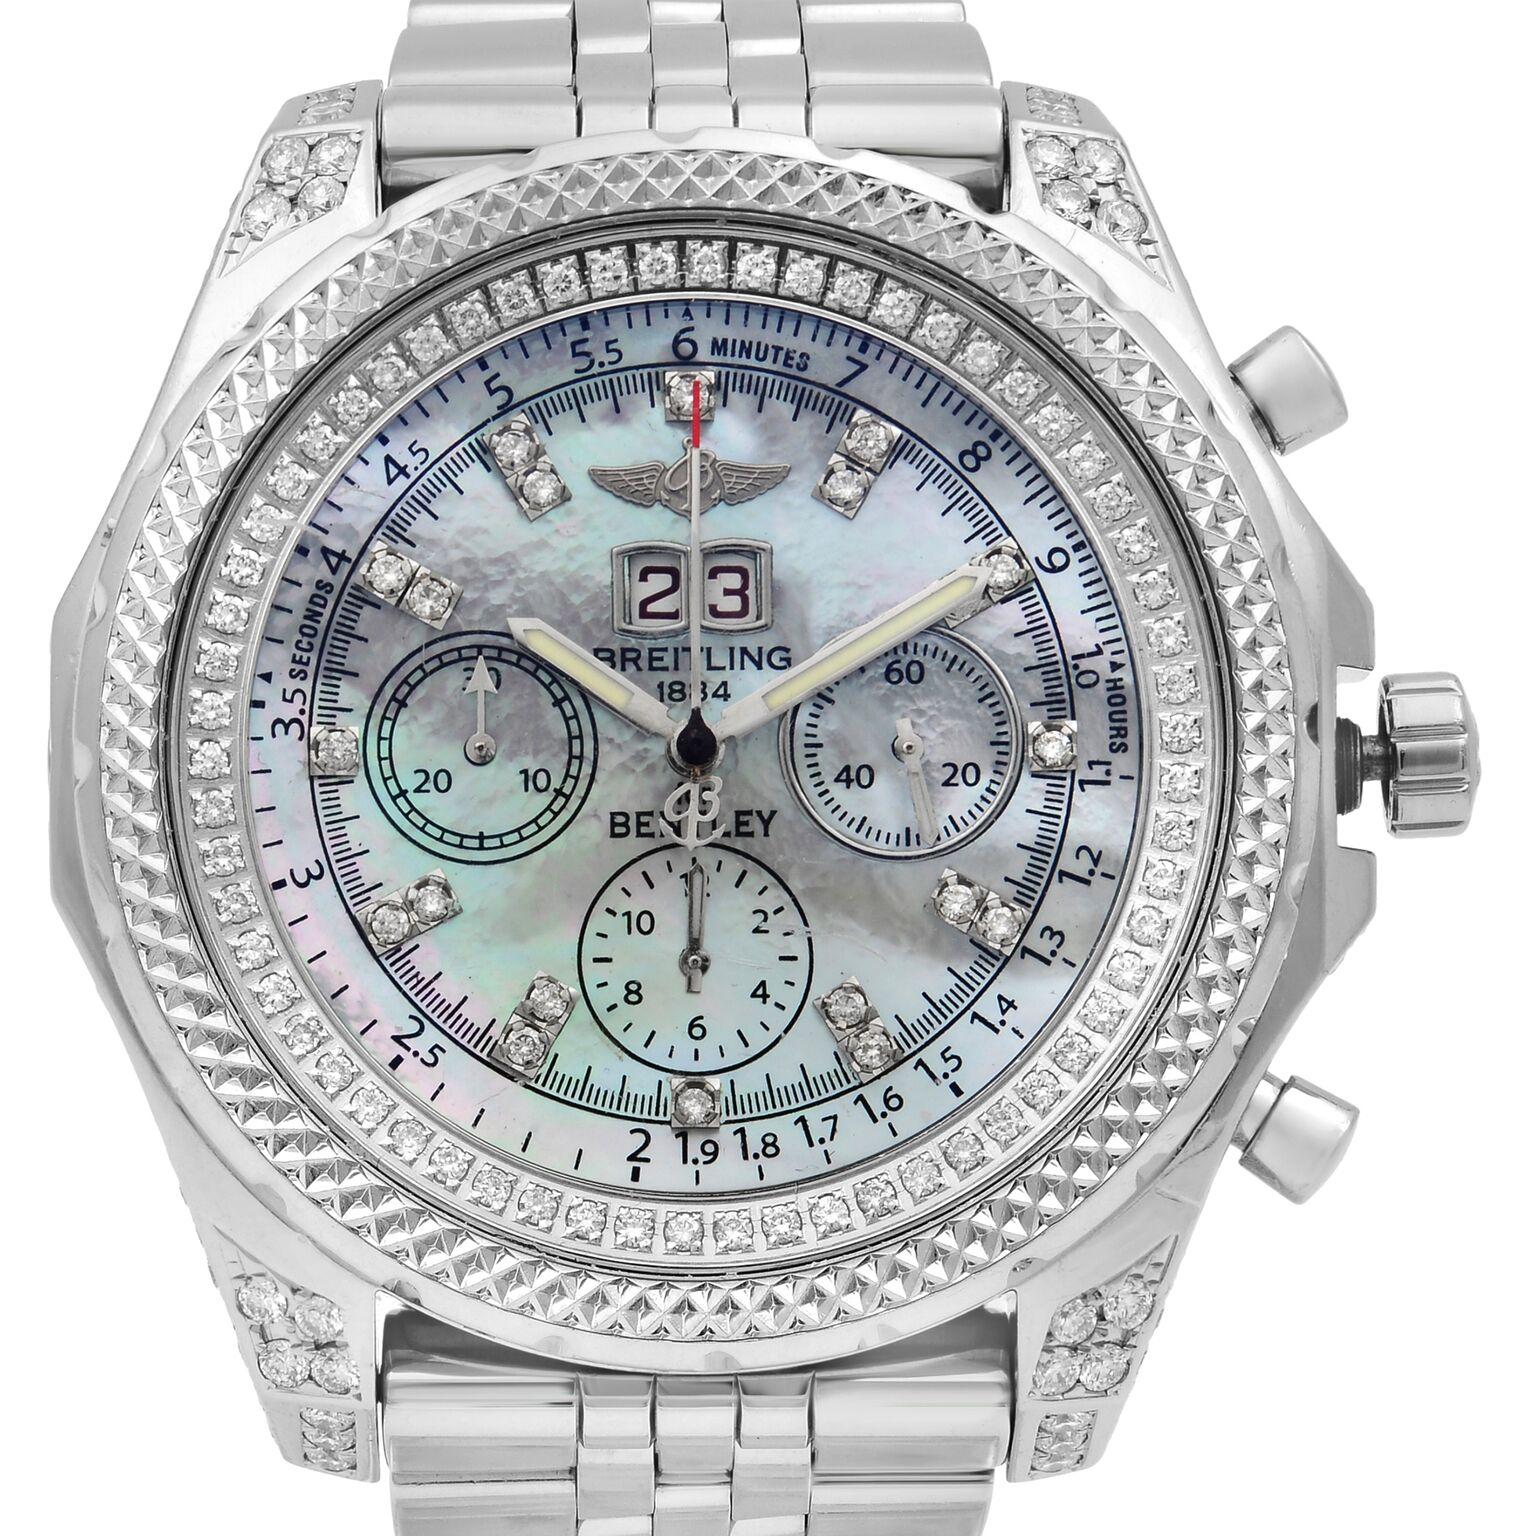 This pre-owned Breitling Bentley Motors A44362 is a beautiful men's timepiece that is powered by a mechanical (automatic) movement which is cased in a stainless steel case. It has a round shape face, chronograph, chronograph hand, date indicator,